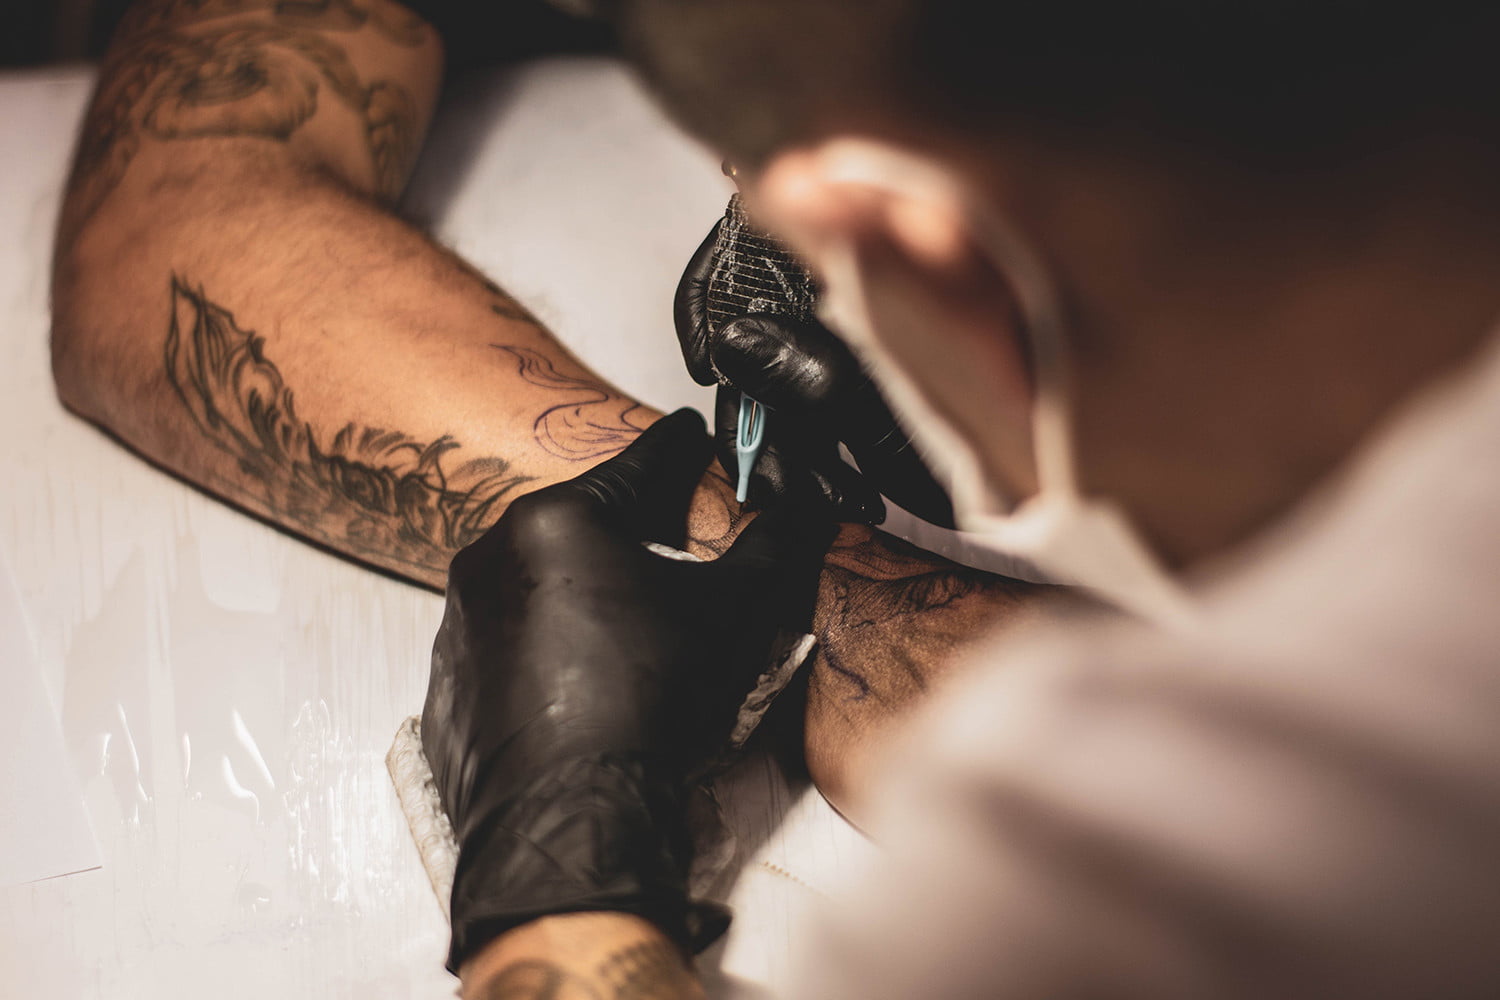 Get complete information about tattoos and tattoo artist